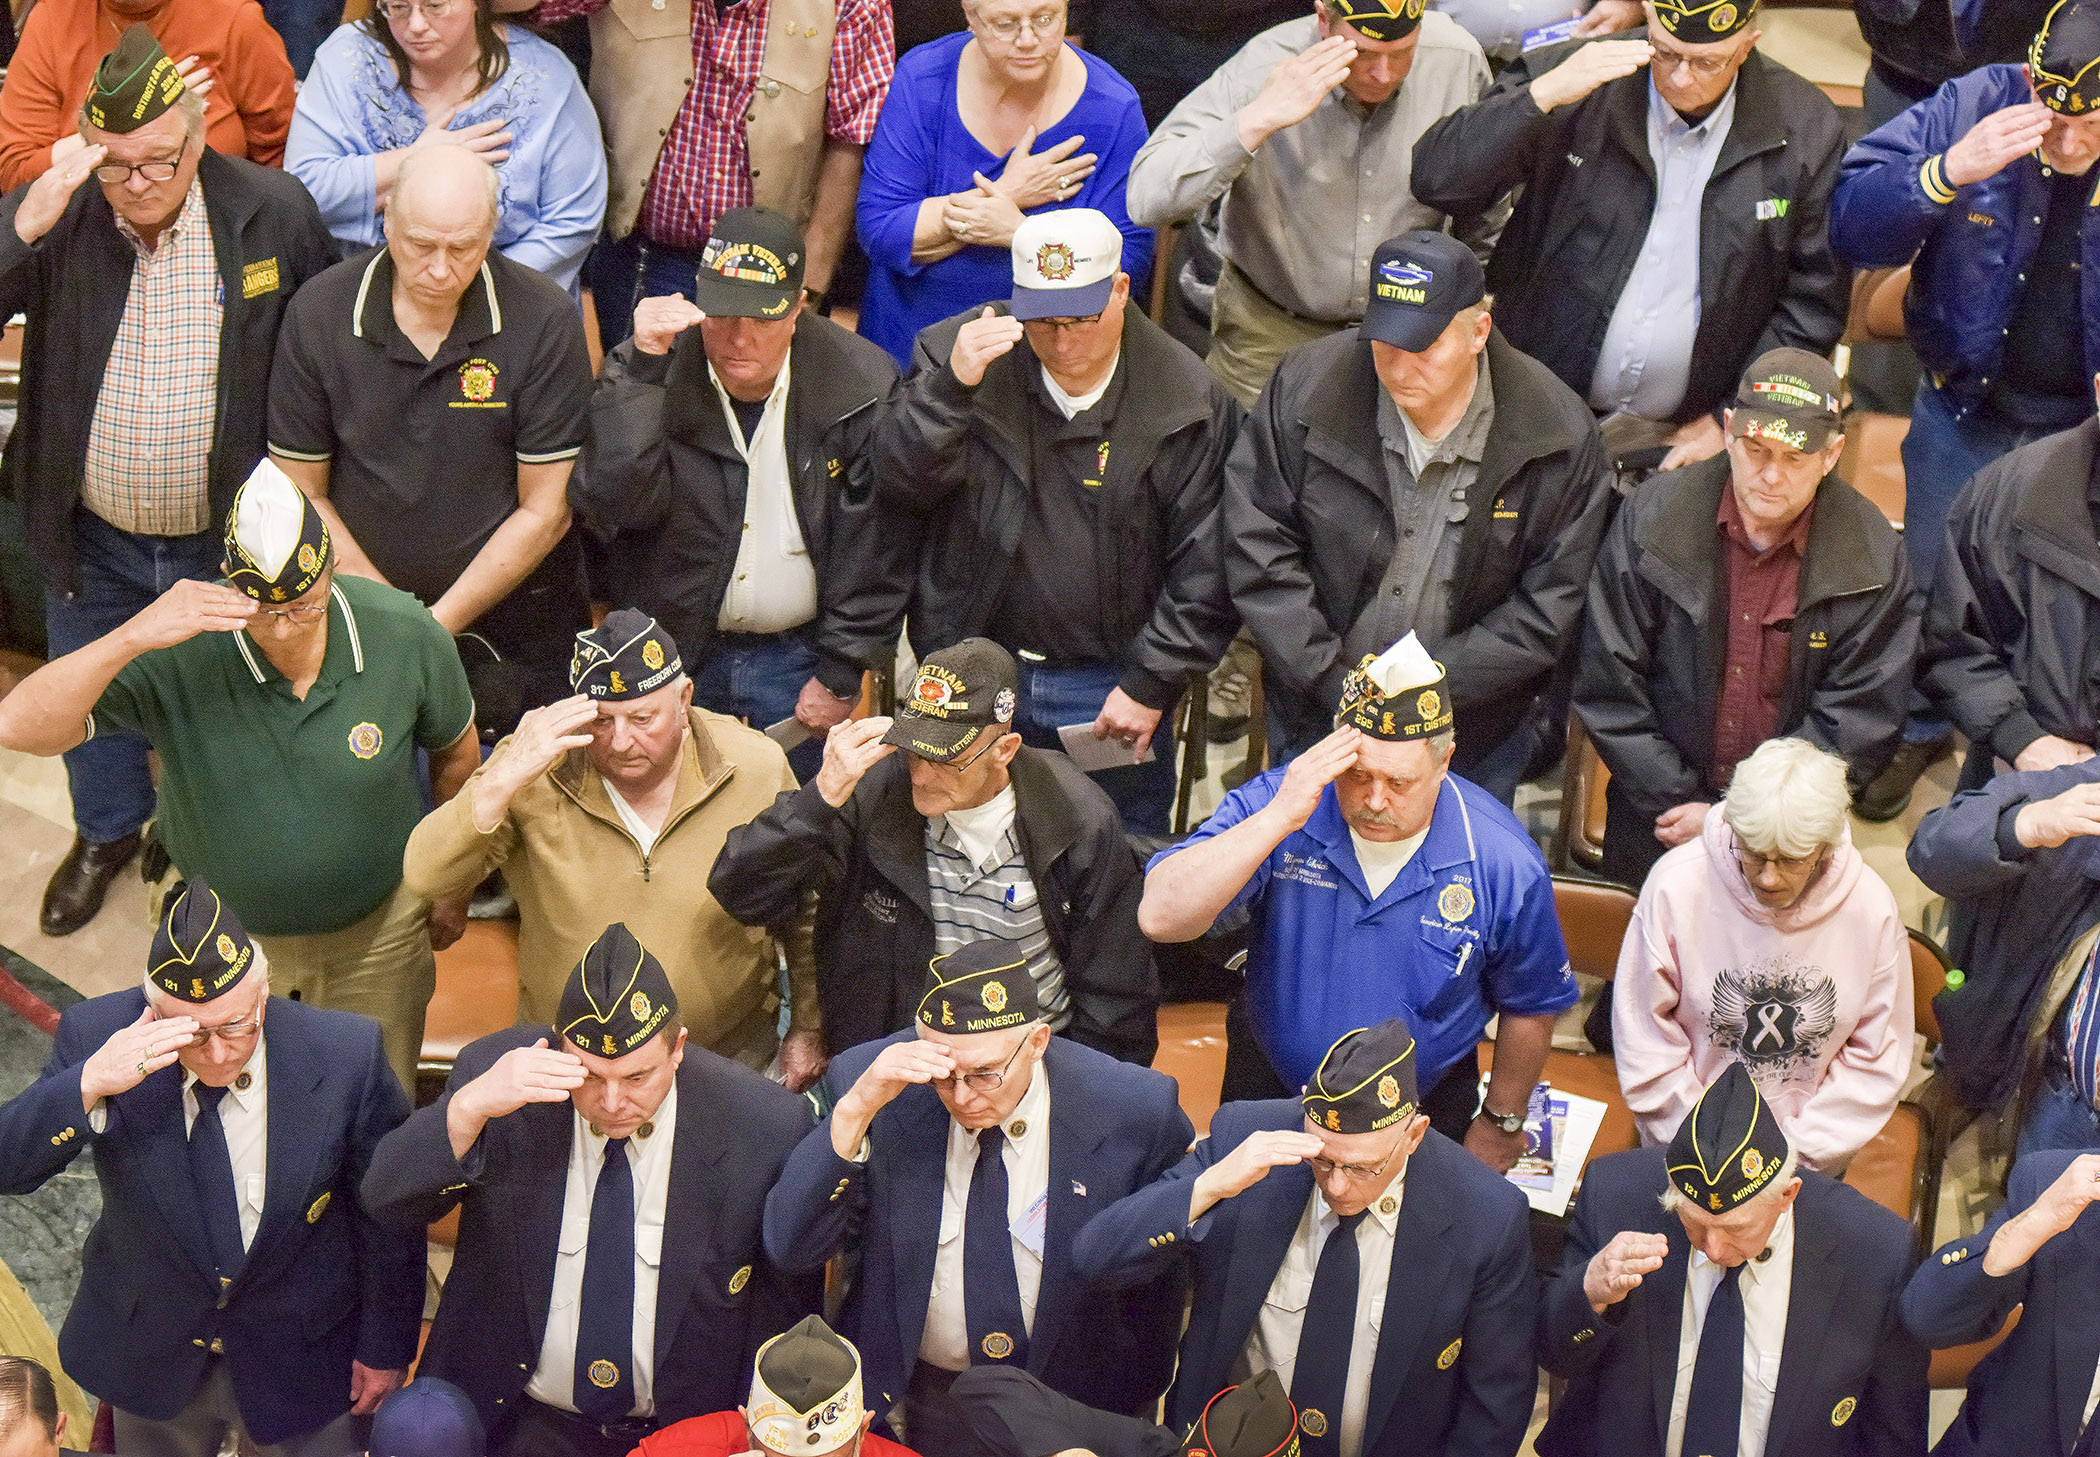 A veterans' rally in the Capitol Rotunda. (House Photography file photo)